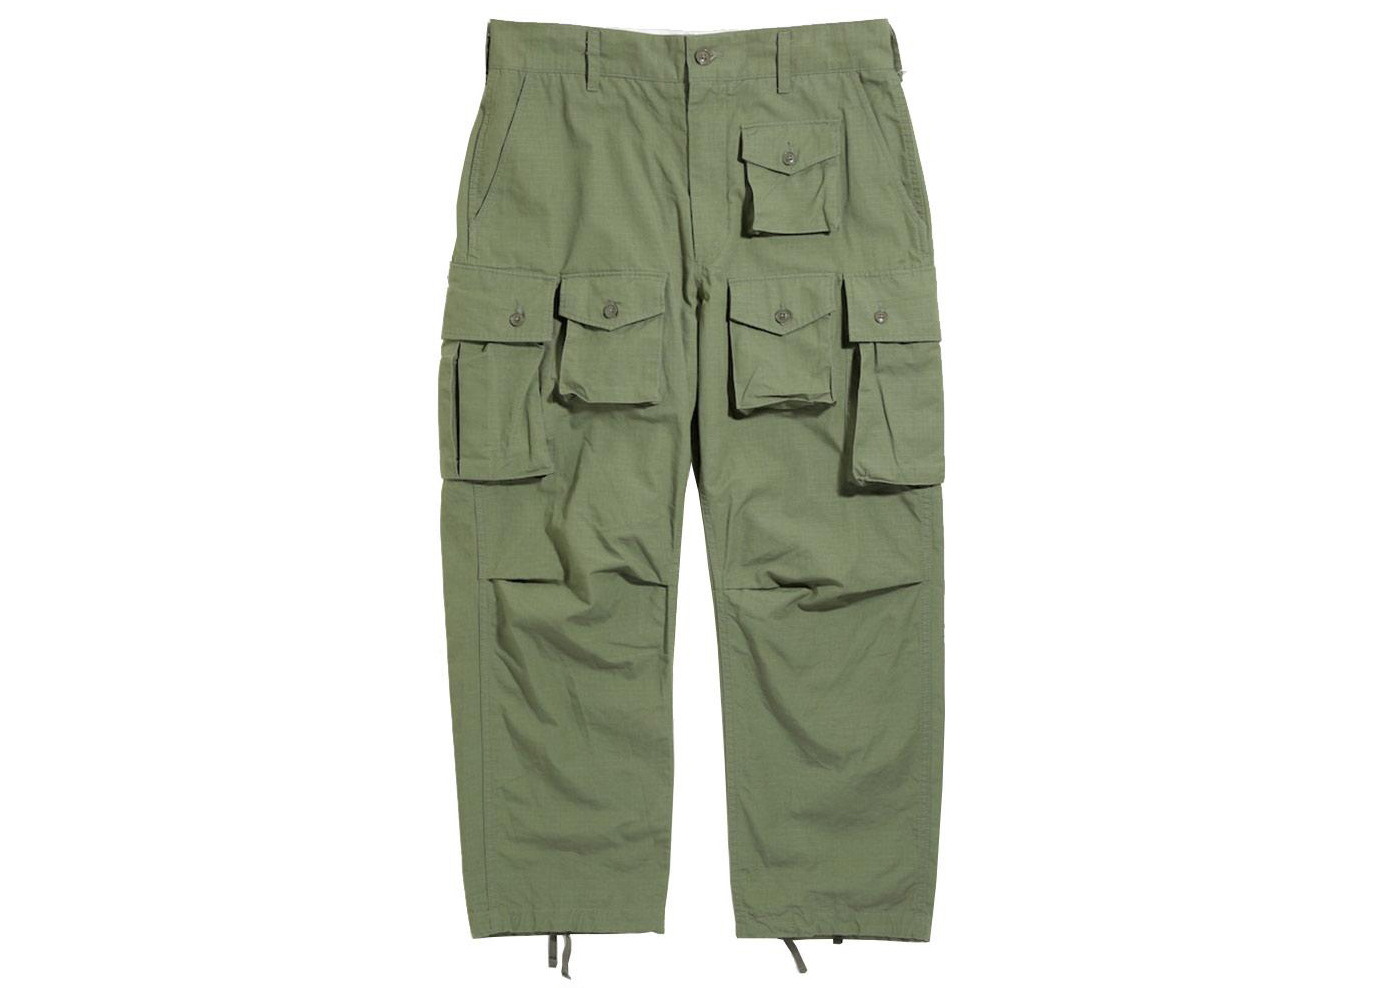 Engineered Garments FA Ripstop Cotton Pant Olive Men's - SS21 - US